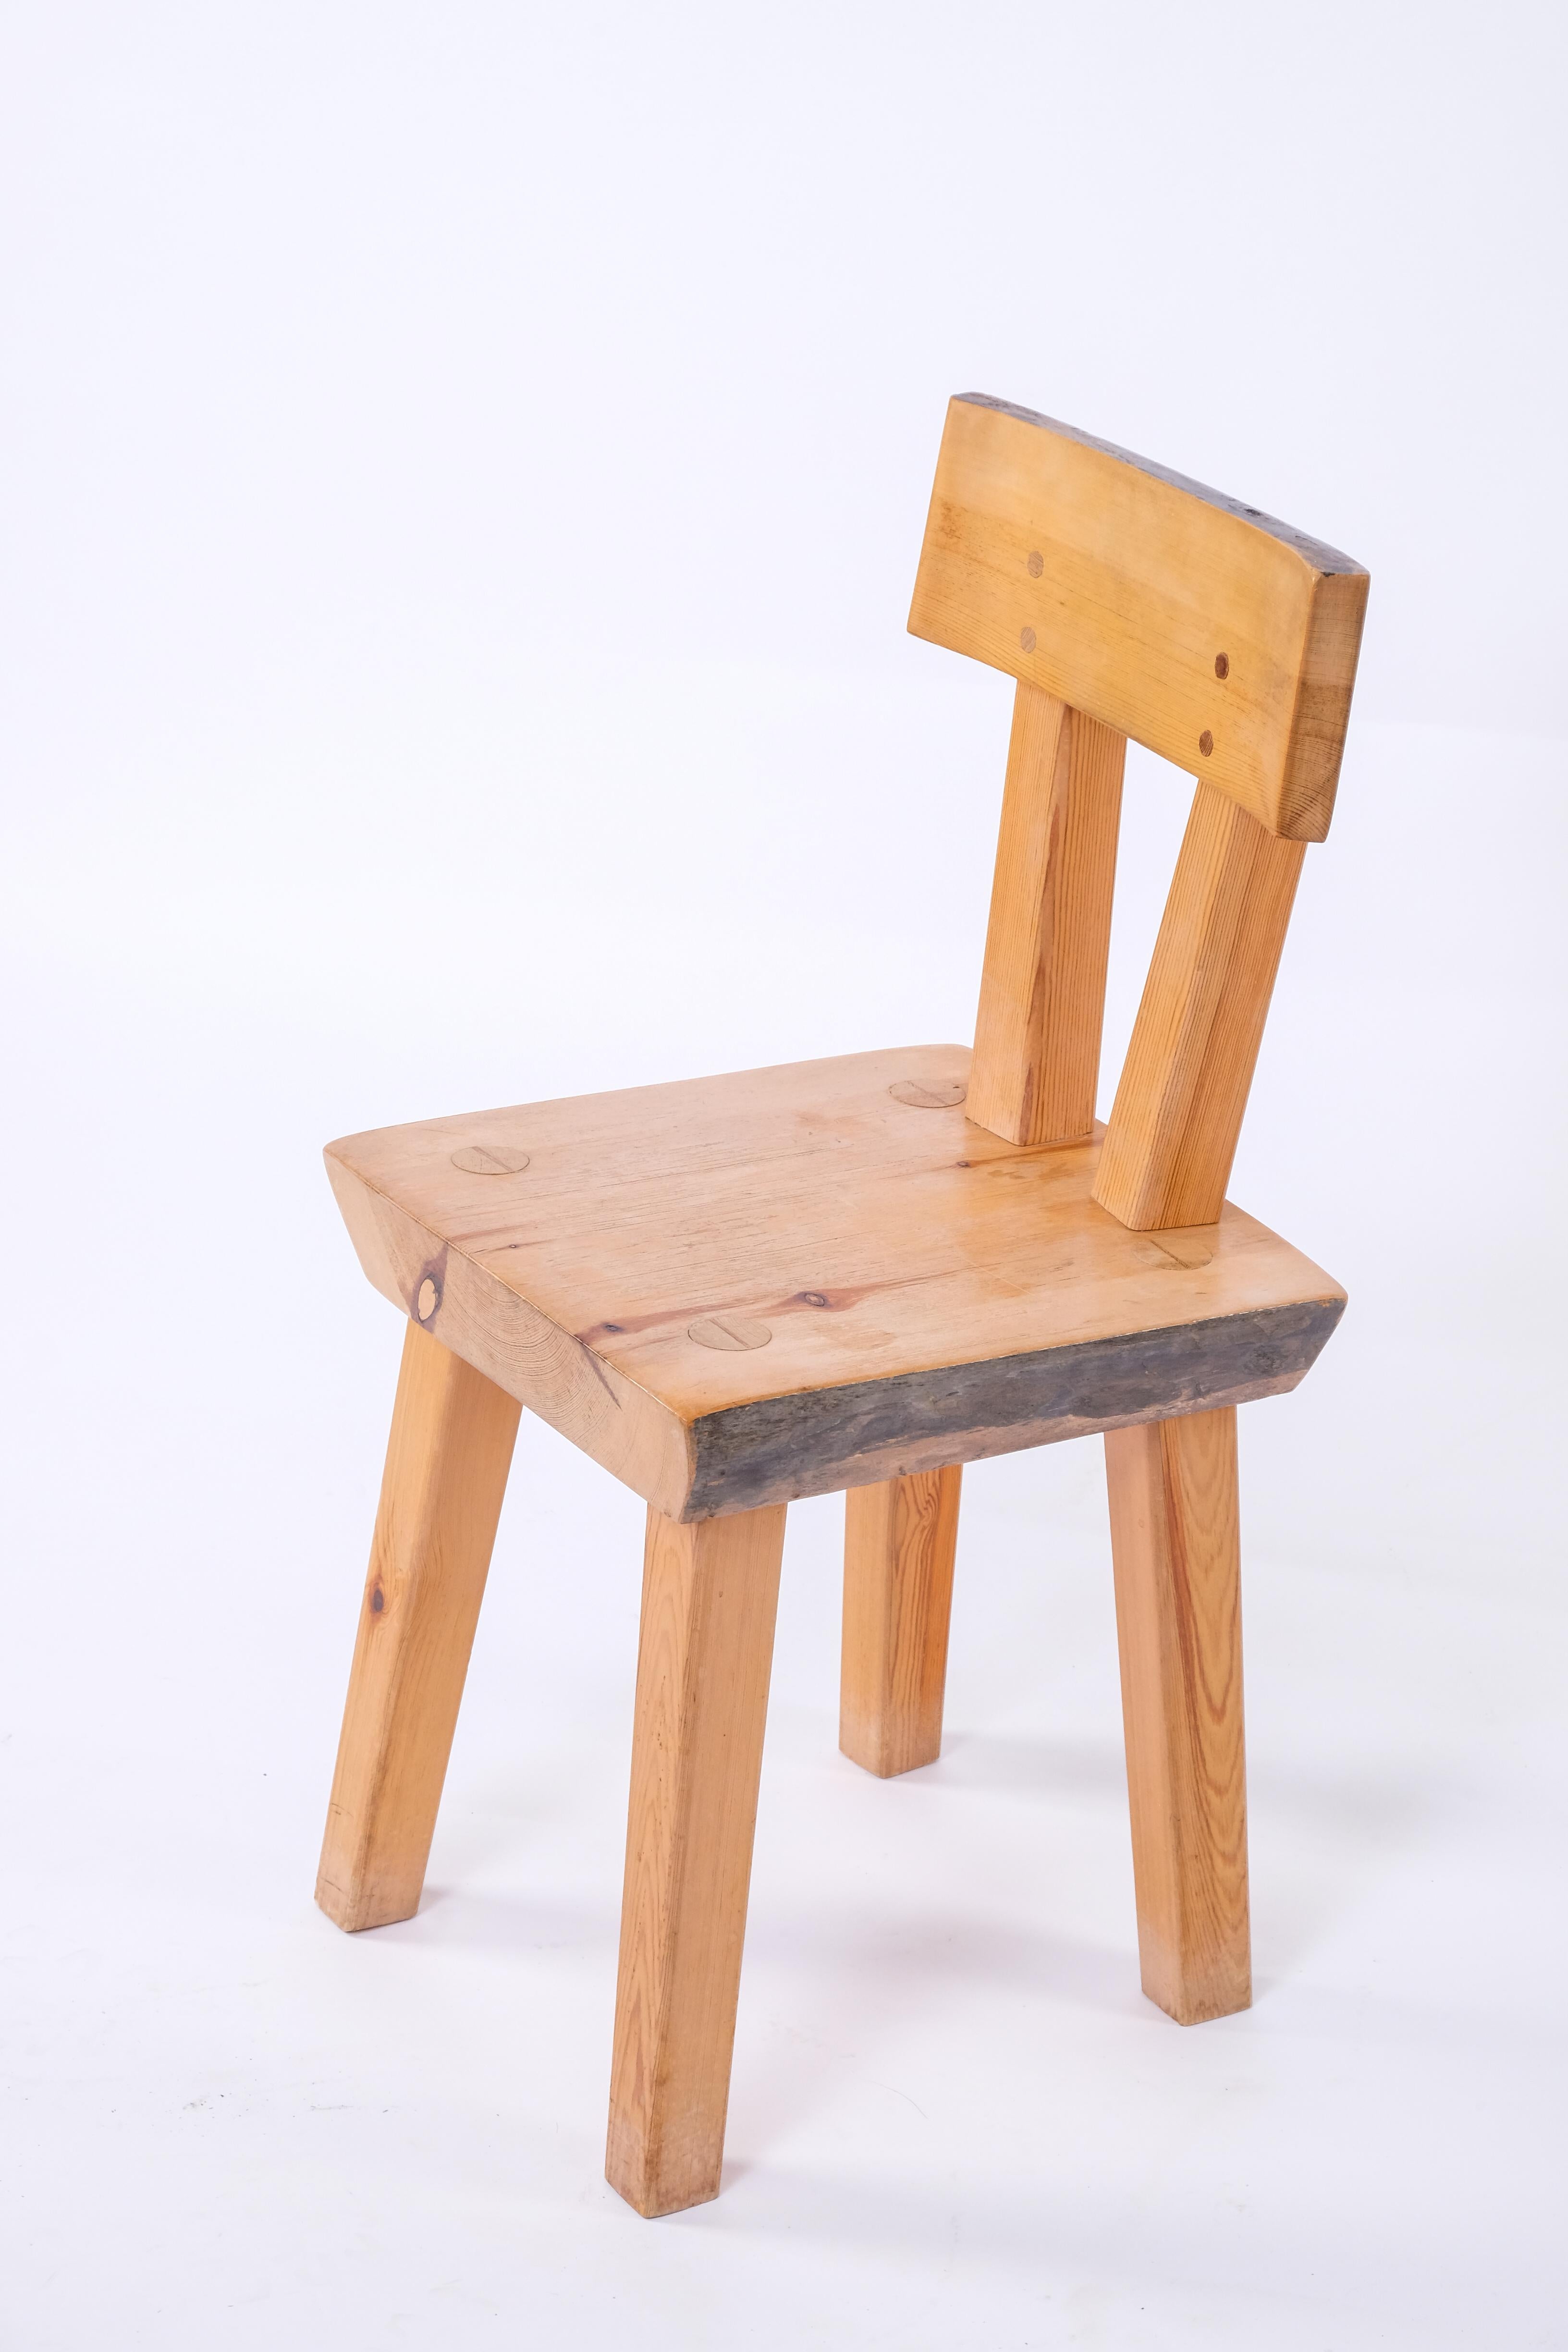 Rare pine chair, produced in Sweden, late 1970s.